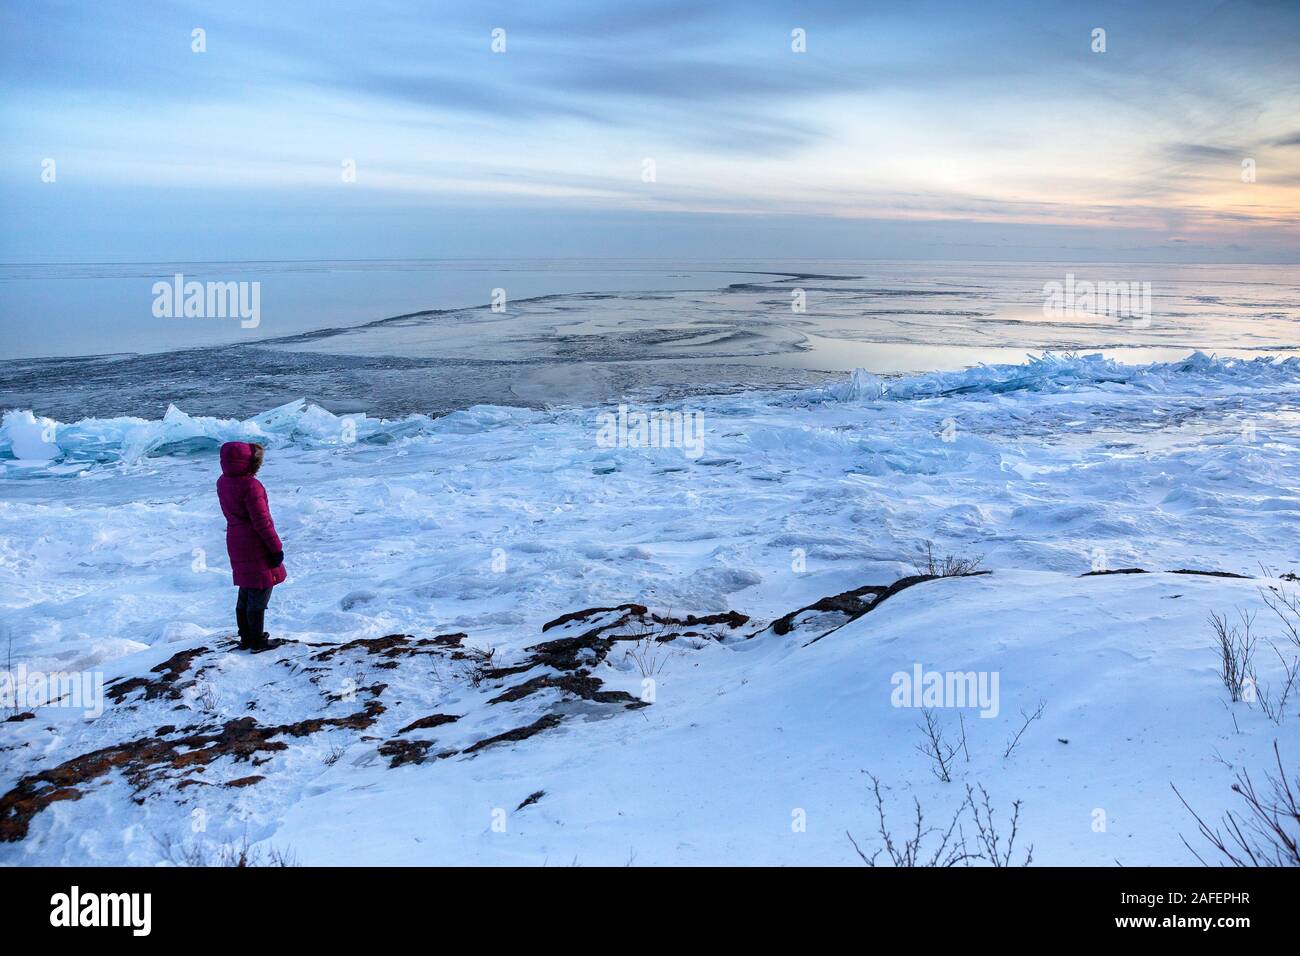 A person wearing a parka coat watching a cold winter sunset along the North Shore of Lake Superior, Minnesota Stock Photo